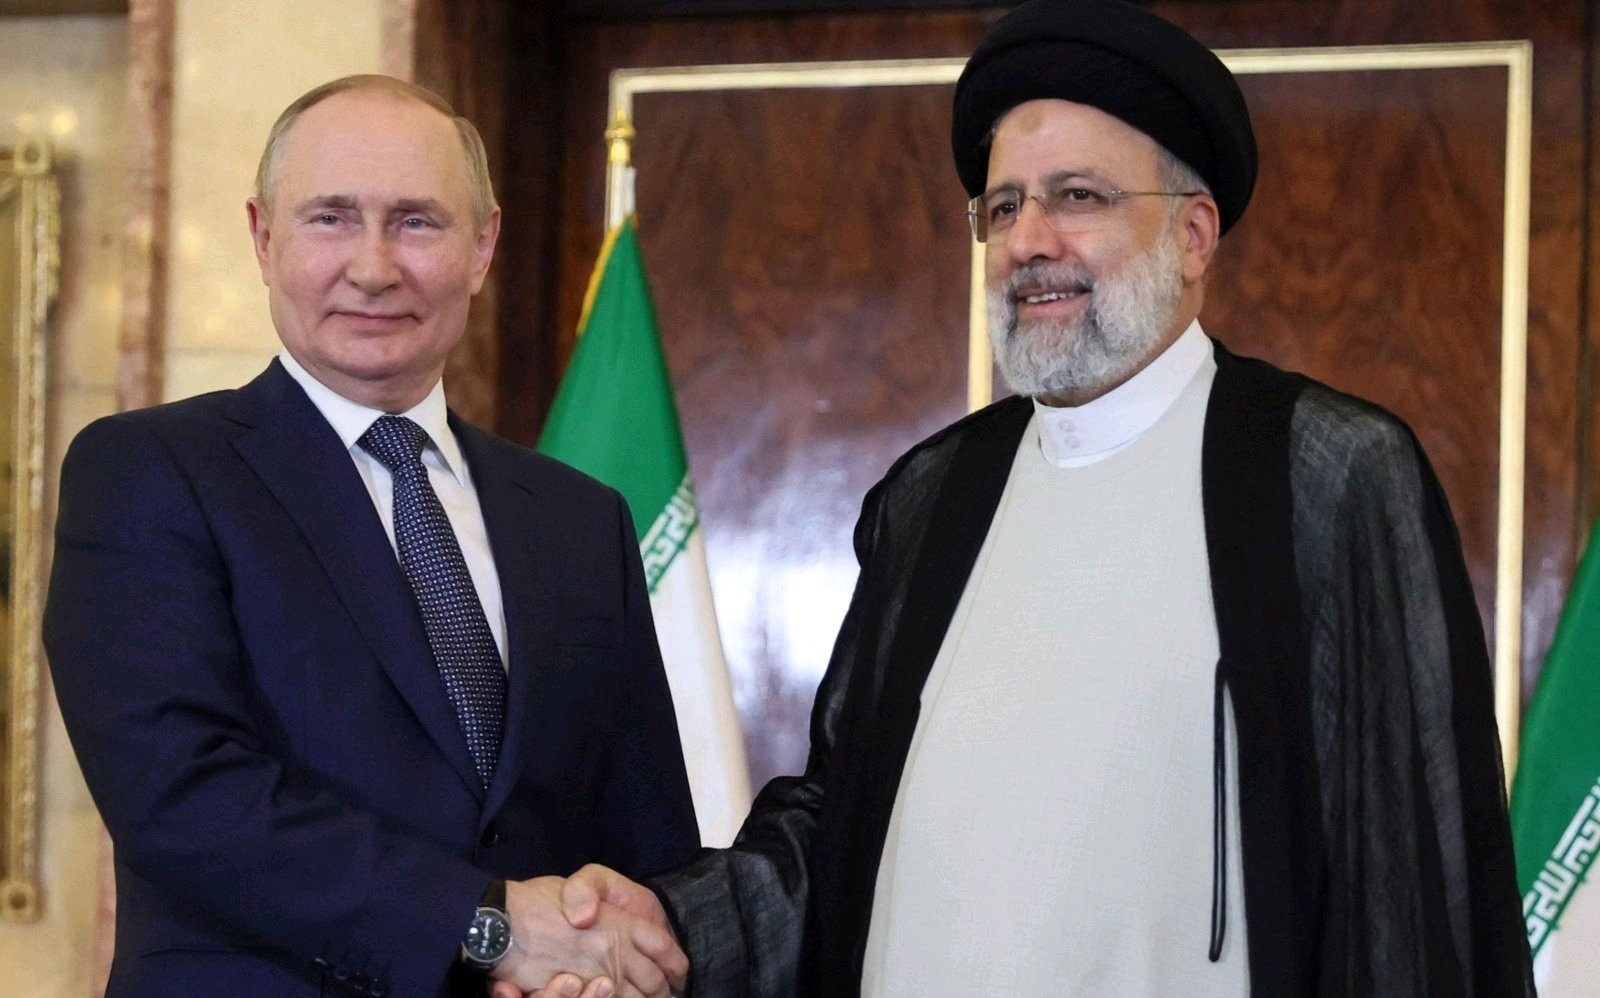 Putin will visit Iran accompanied by four Sukhoi 35 planes and strict security protocols.